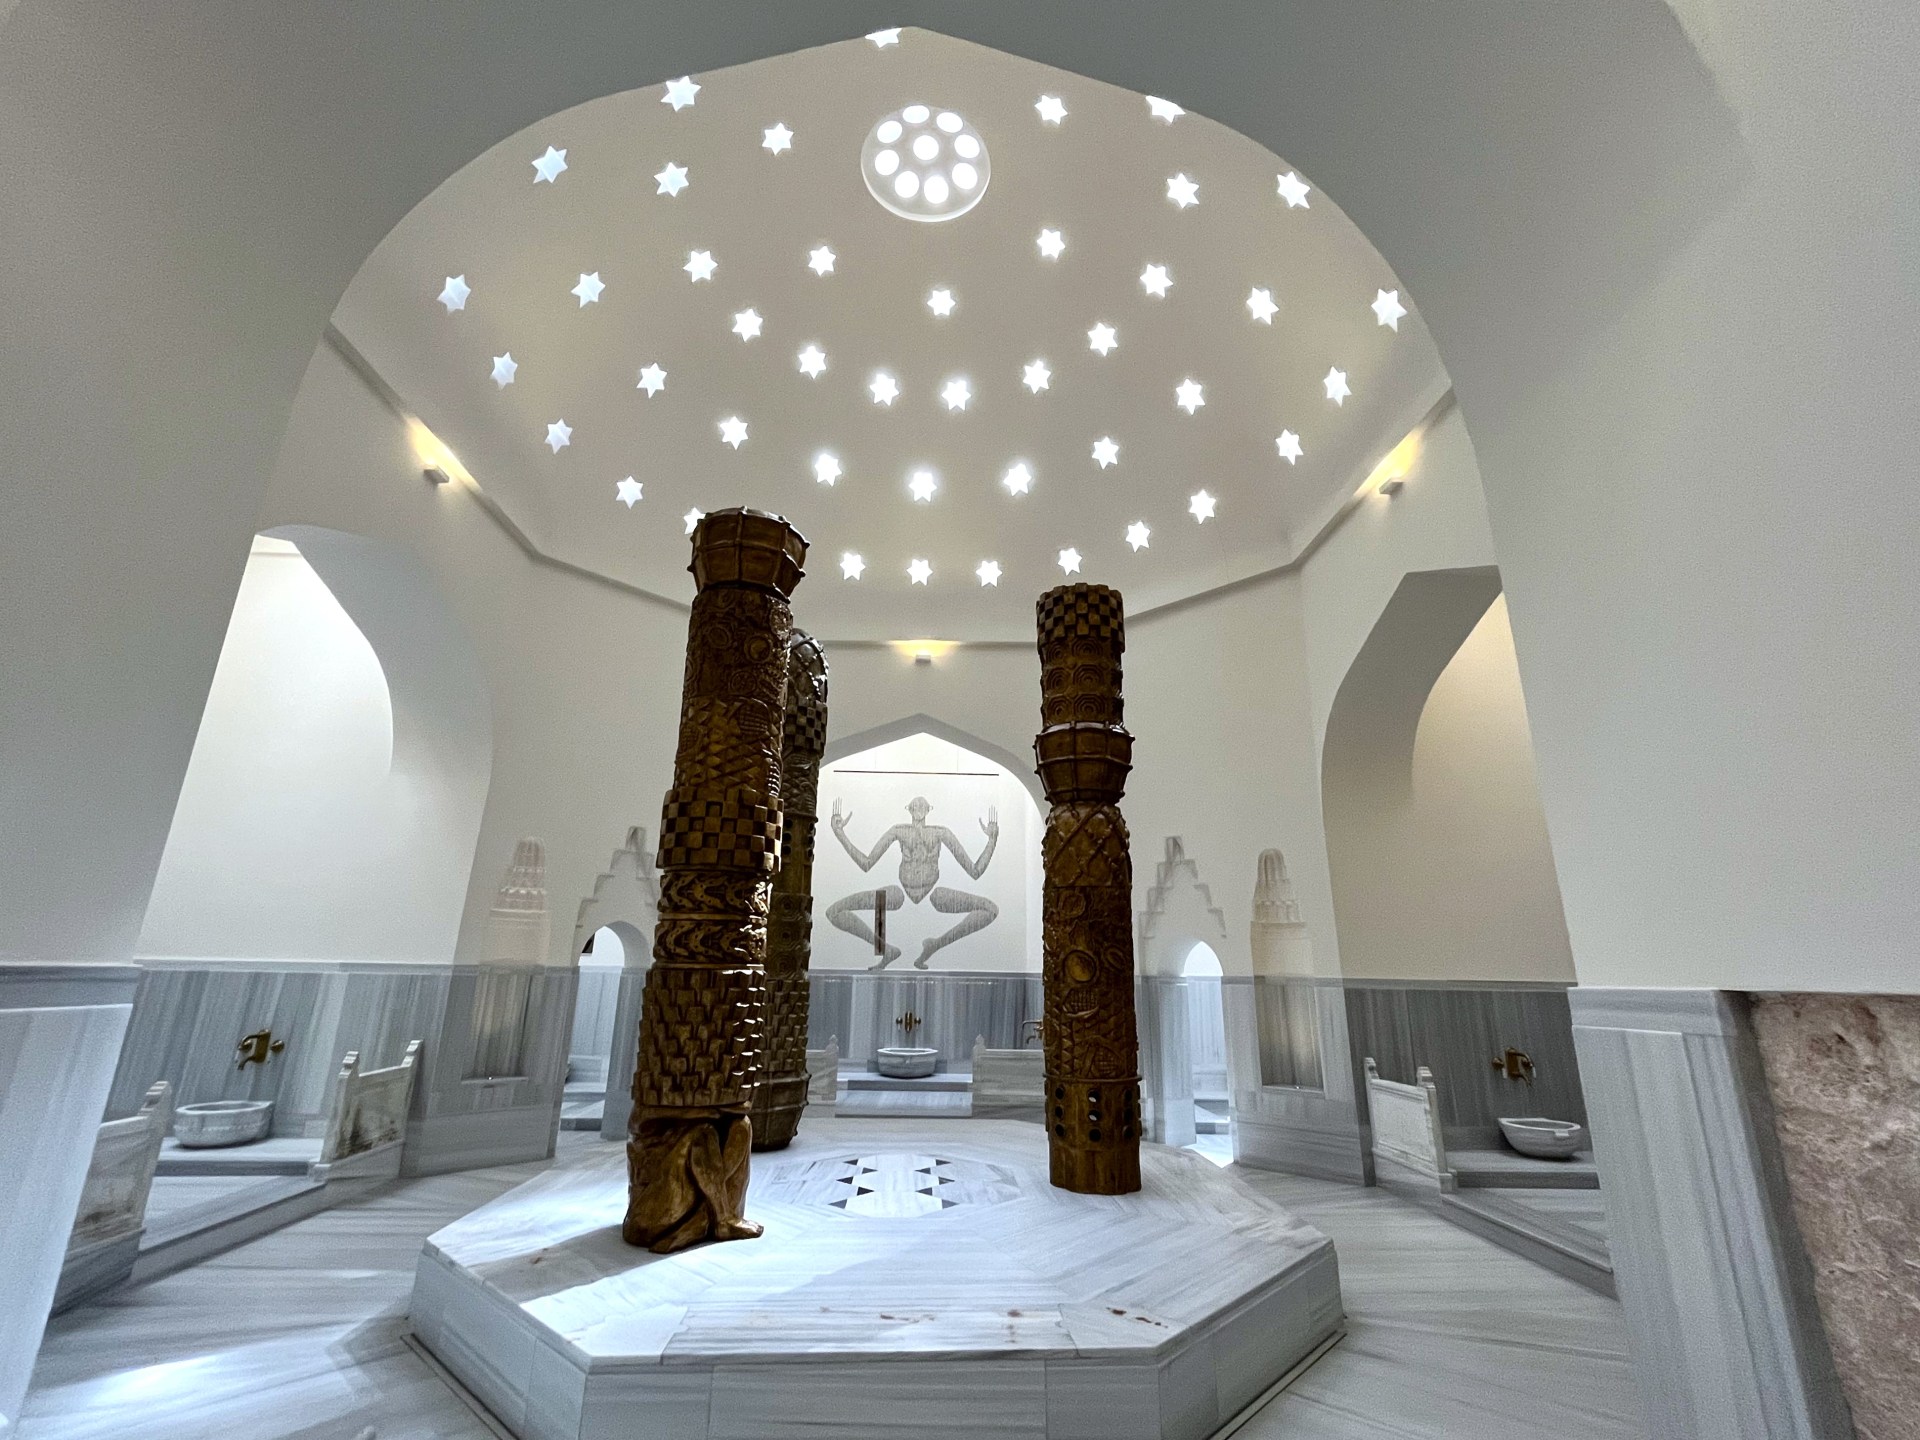 Healing Ruins explores cleansing, rebirth in a 14th century Turkish hamam thumbnail